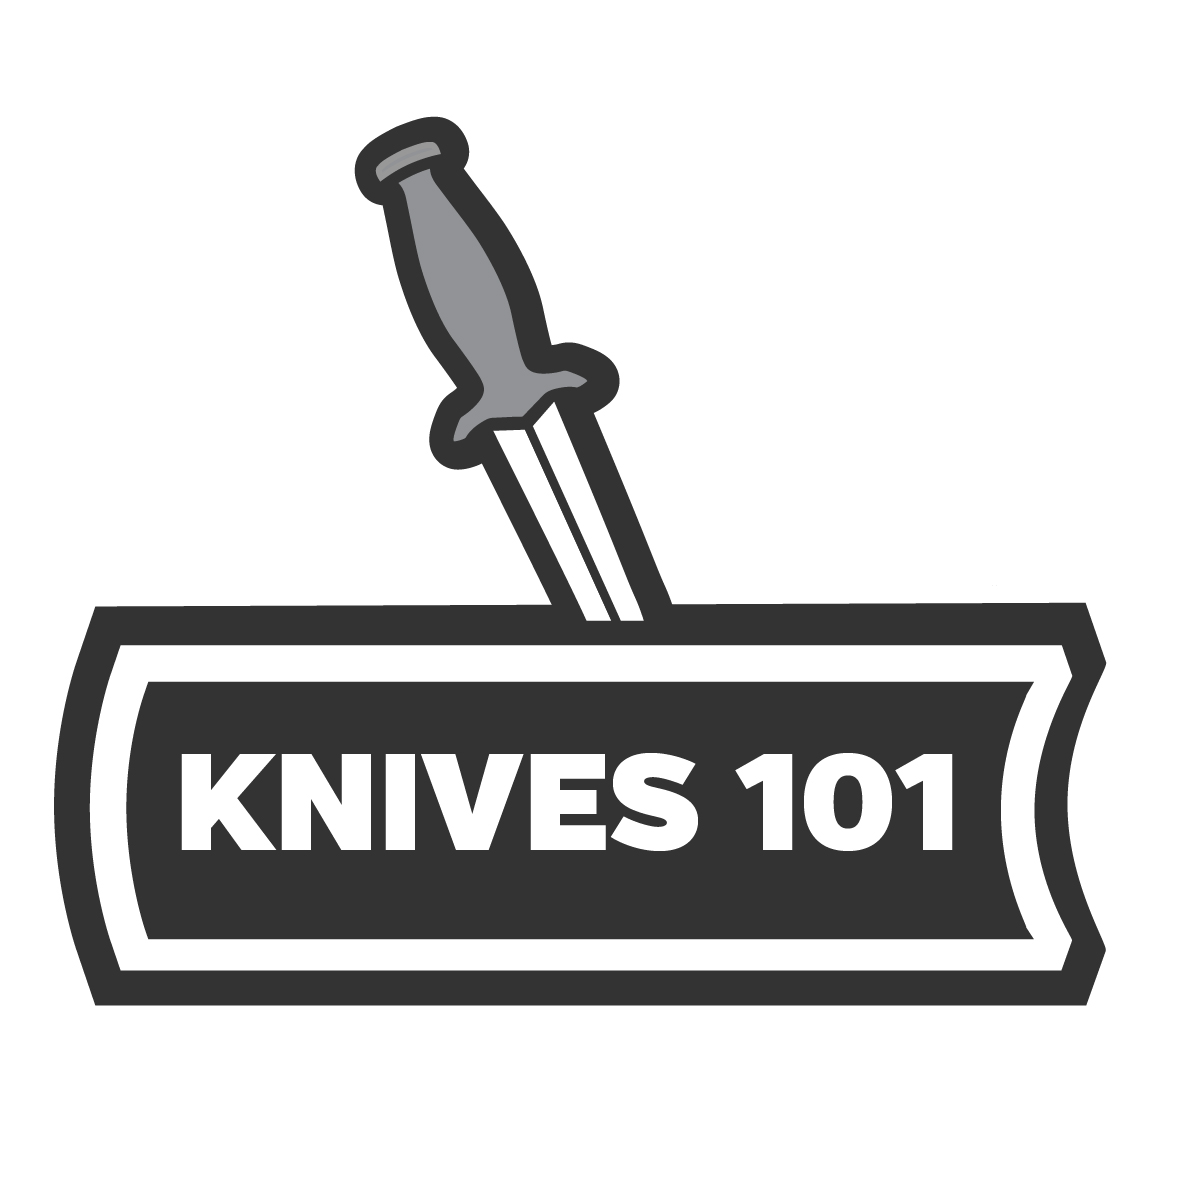 Return to Knife 101 Main Page